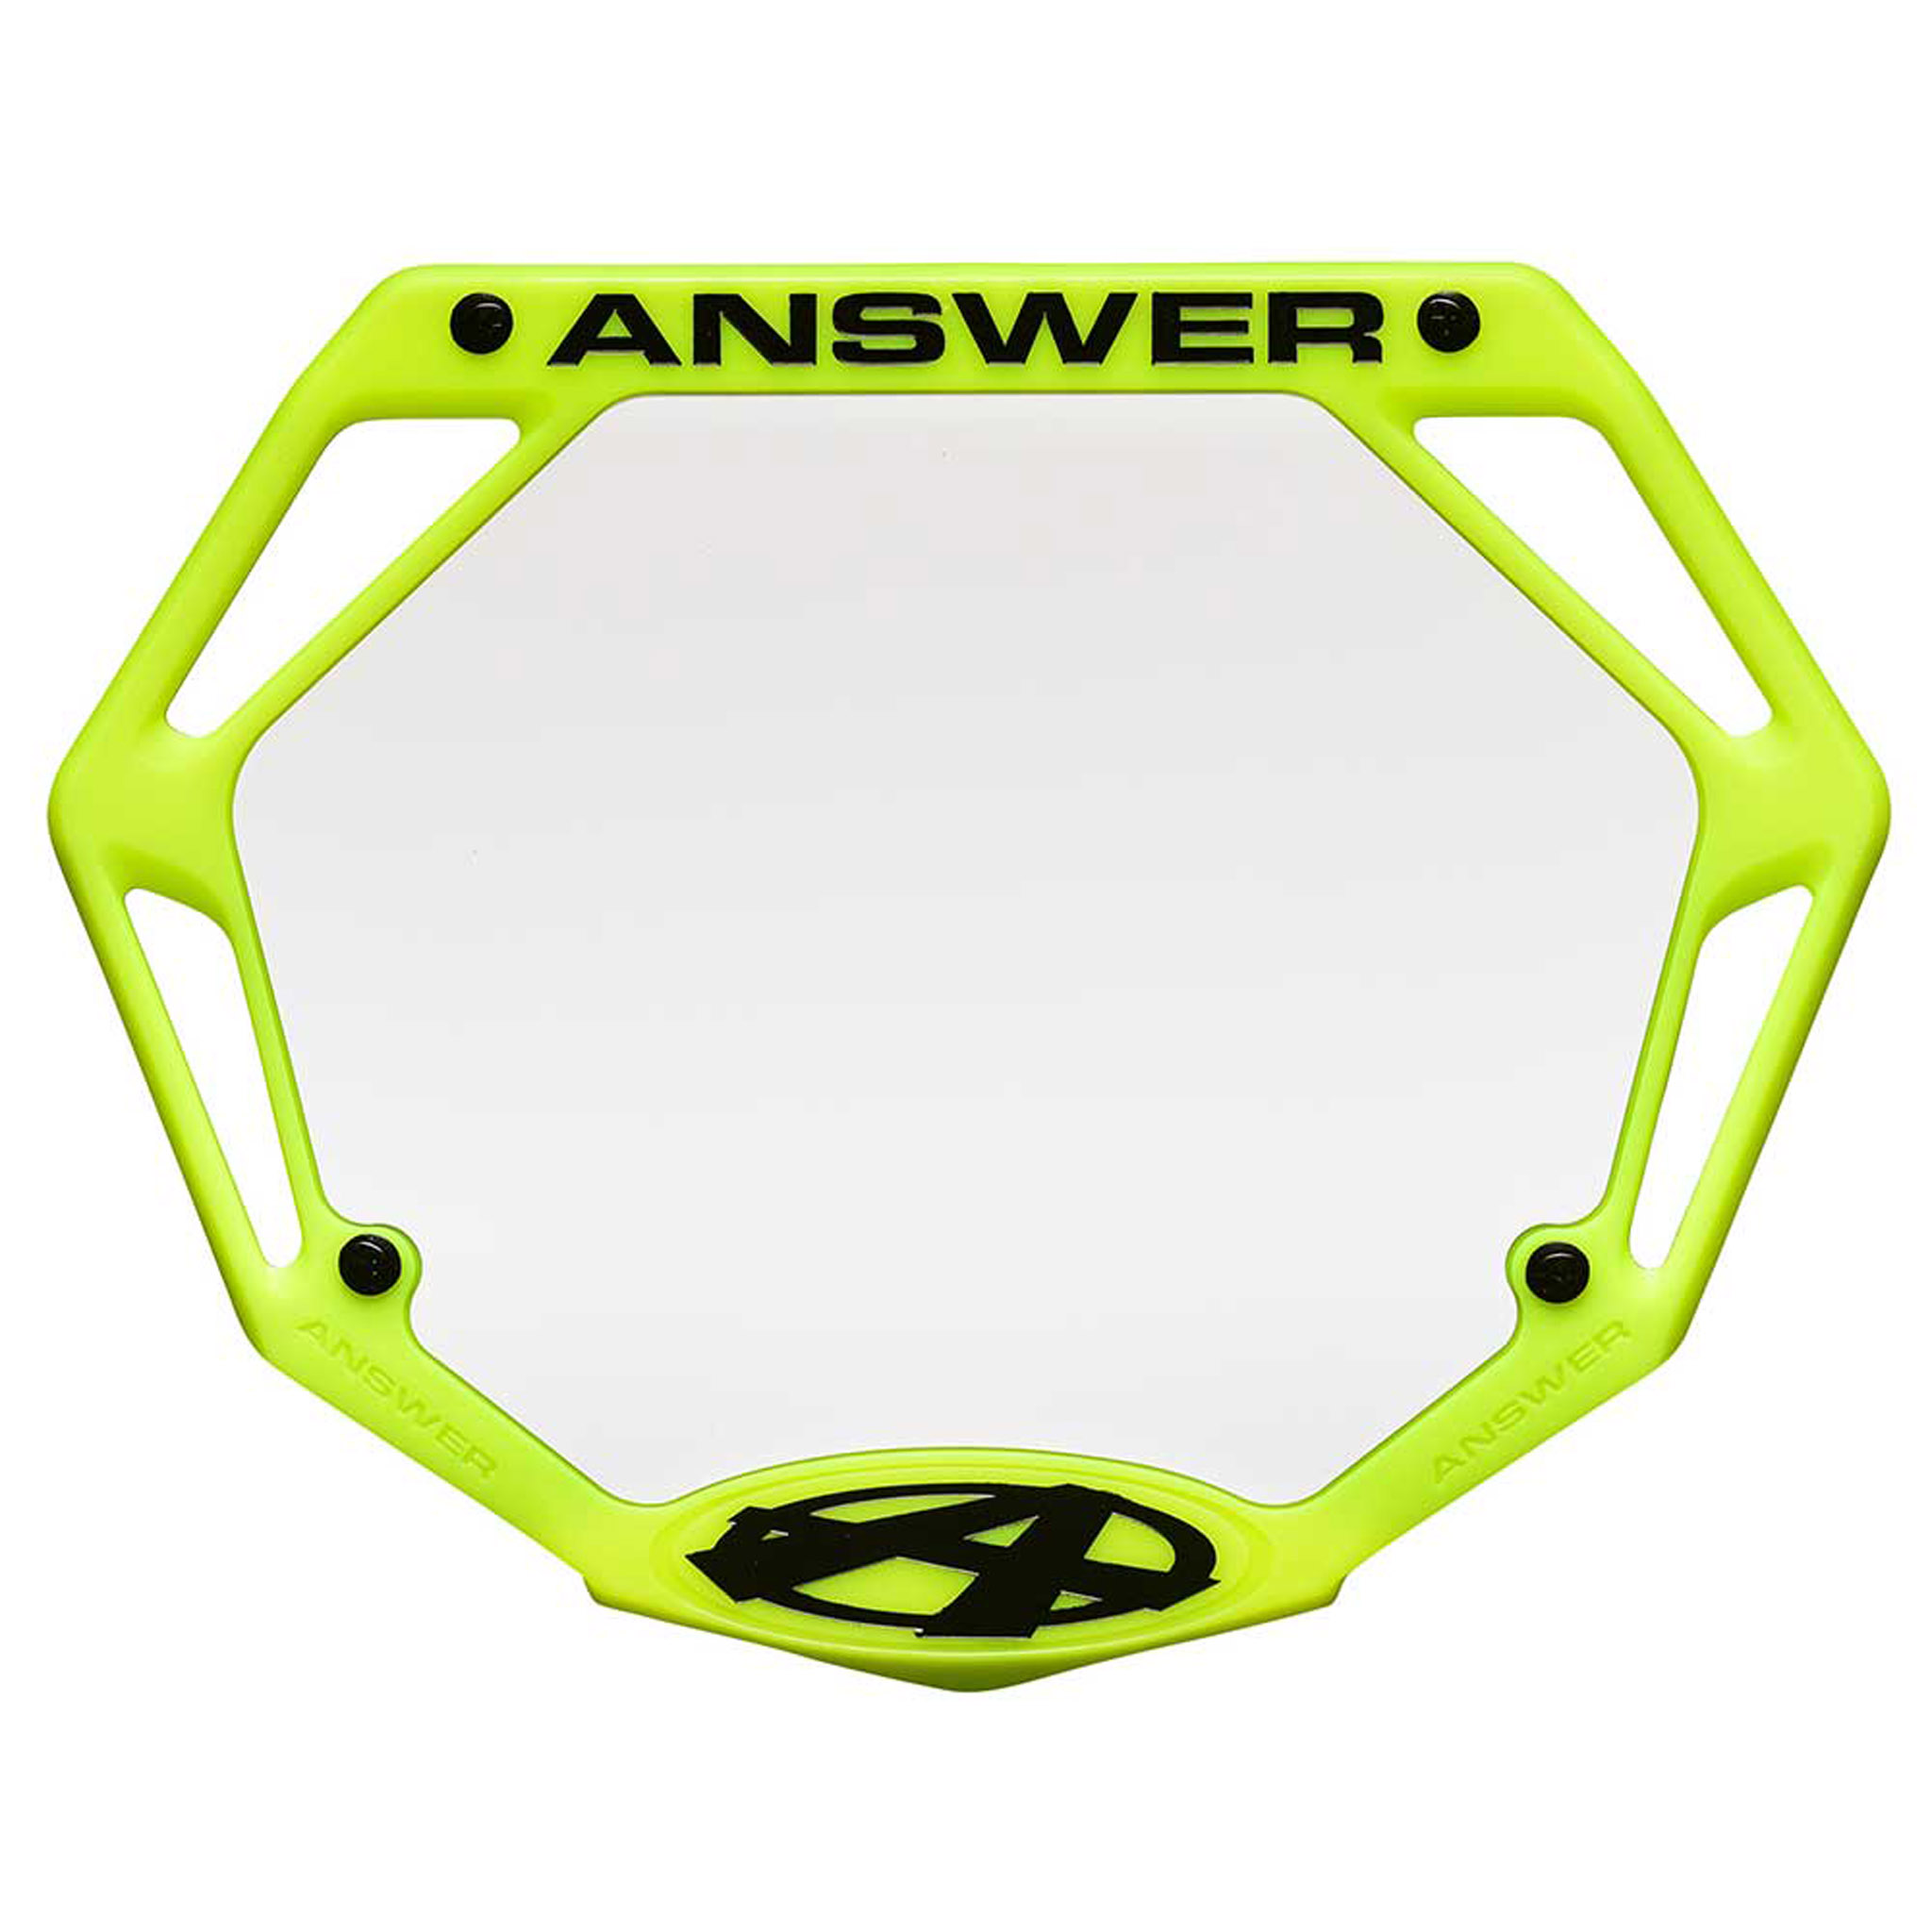 AnswerBMX 3D Number Plate, Pro, Flo Yellow